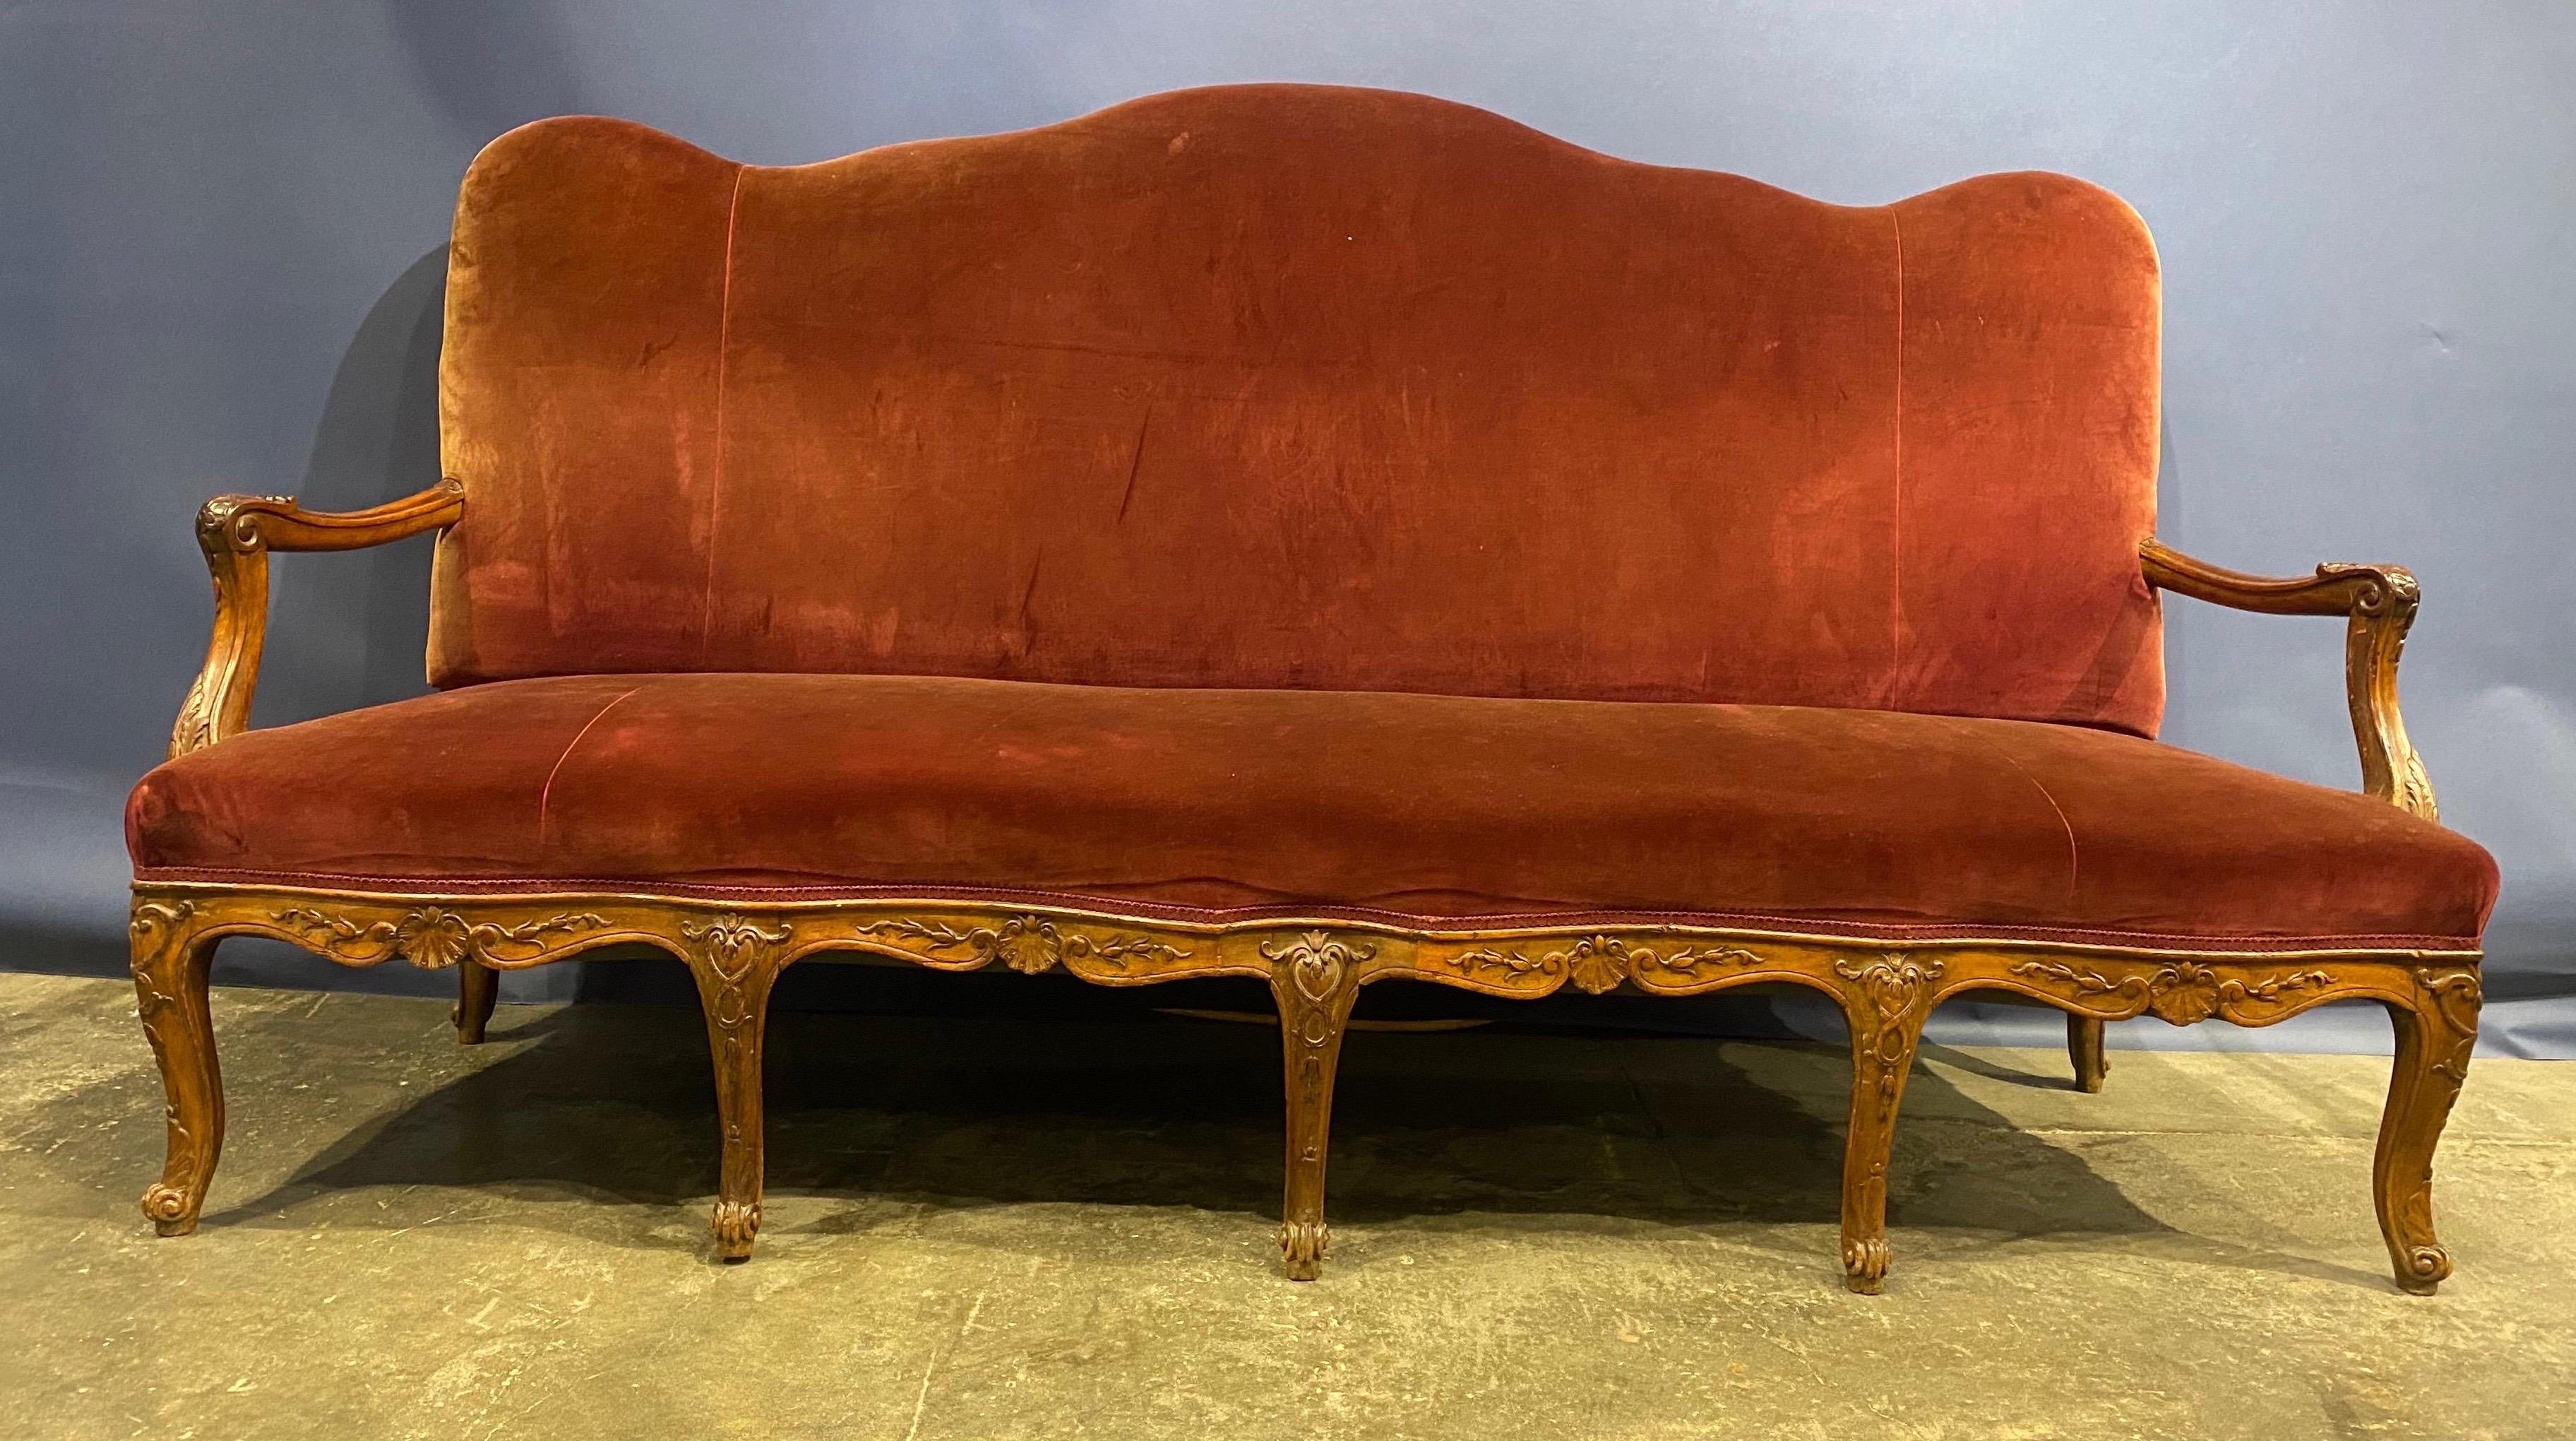 Large scale 19th century French carved walnut serpentine form sofa. Wonderfully carved apron and knees. Very comfortable. Velvet upholstery in pretty good shape, few minor spots. Could easily be reupholstered.